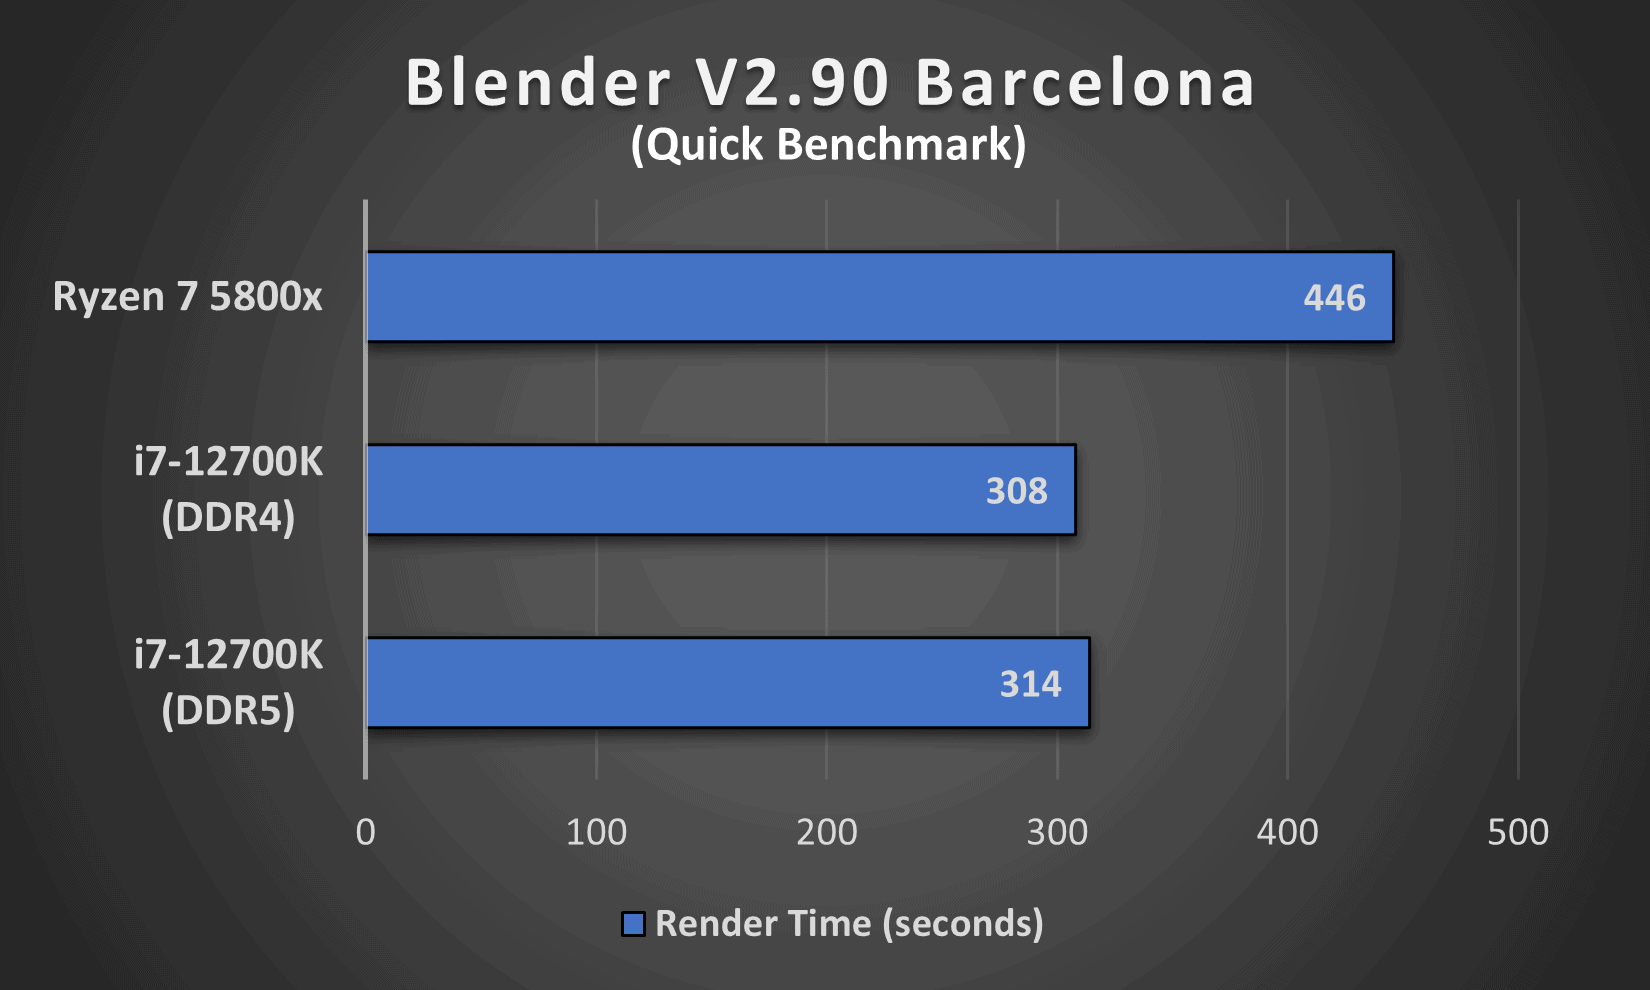 Blender V2.90 performance comparison between Intel's i7 12700K (DDR4 and DDR5) and AMD's Ryzen 7 5800x